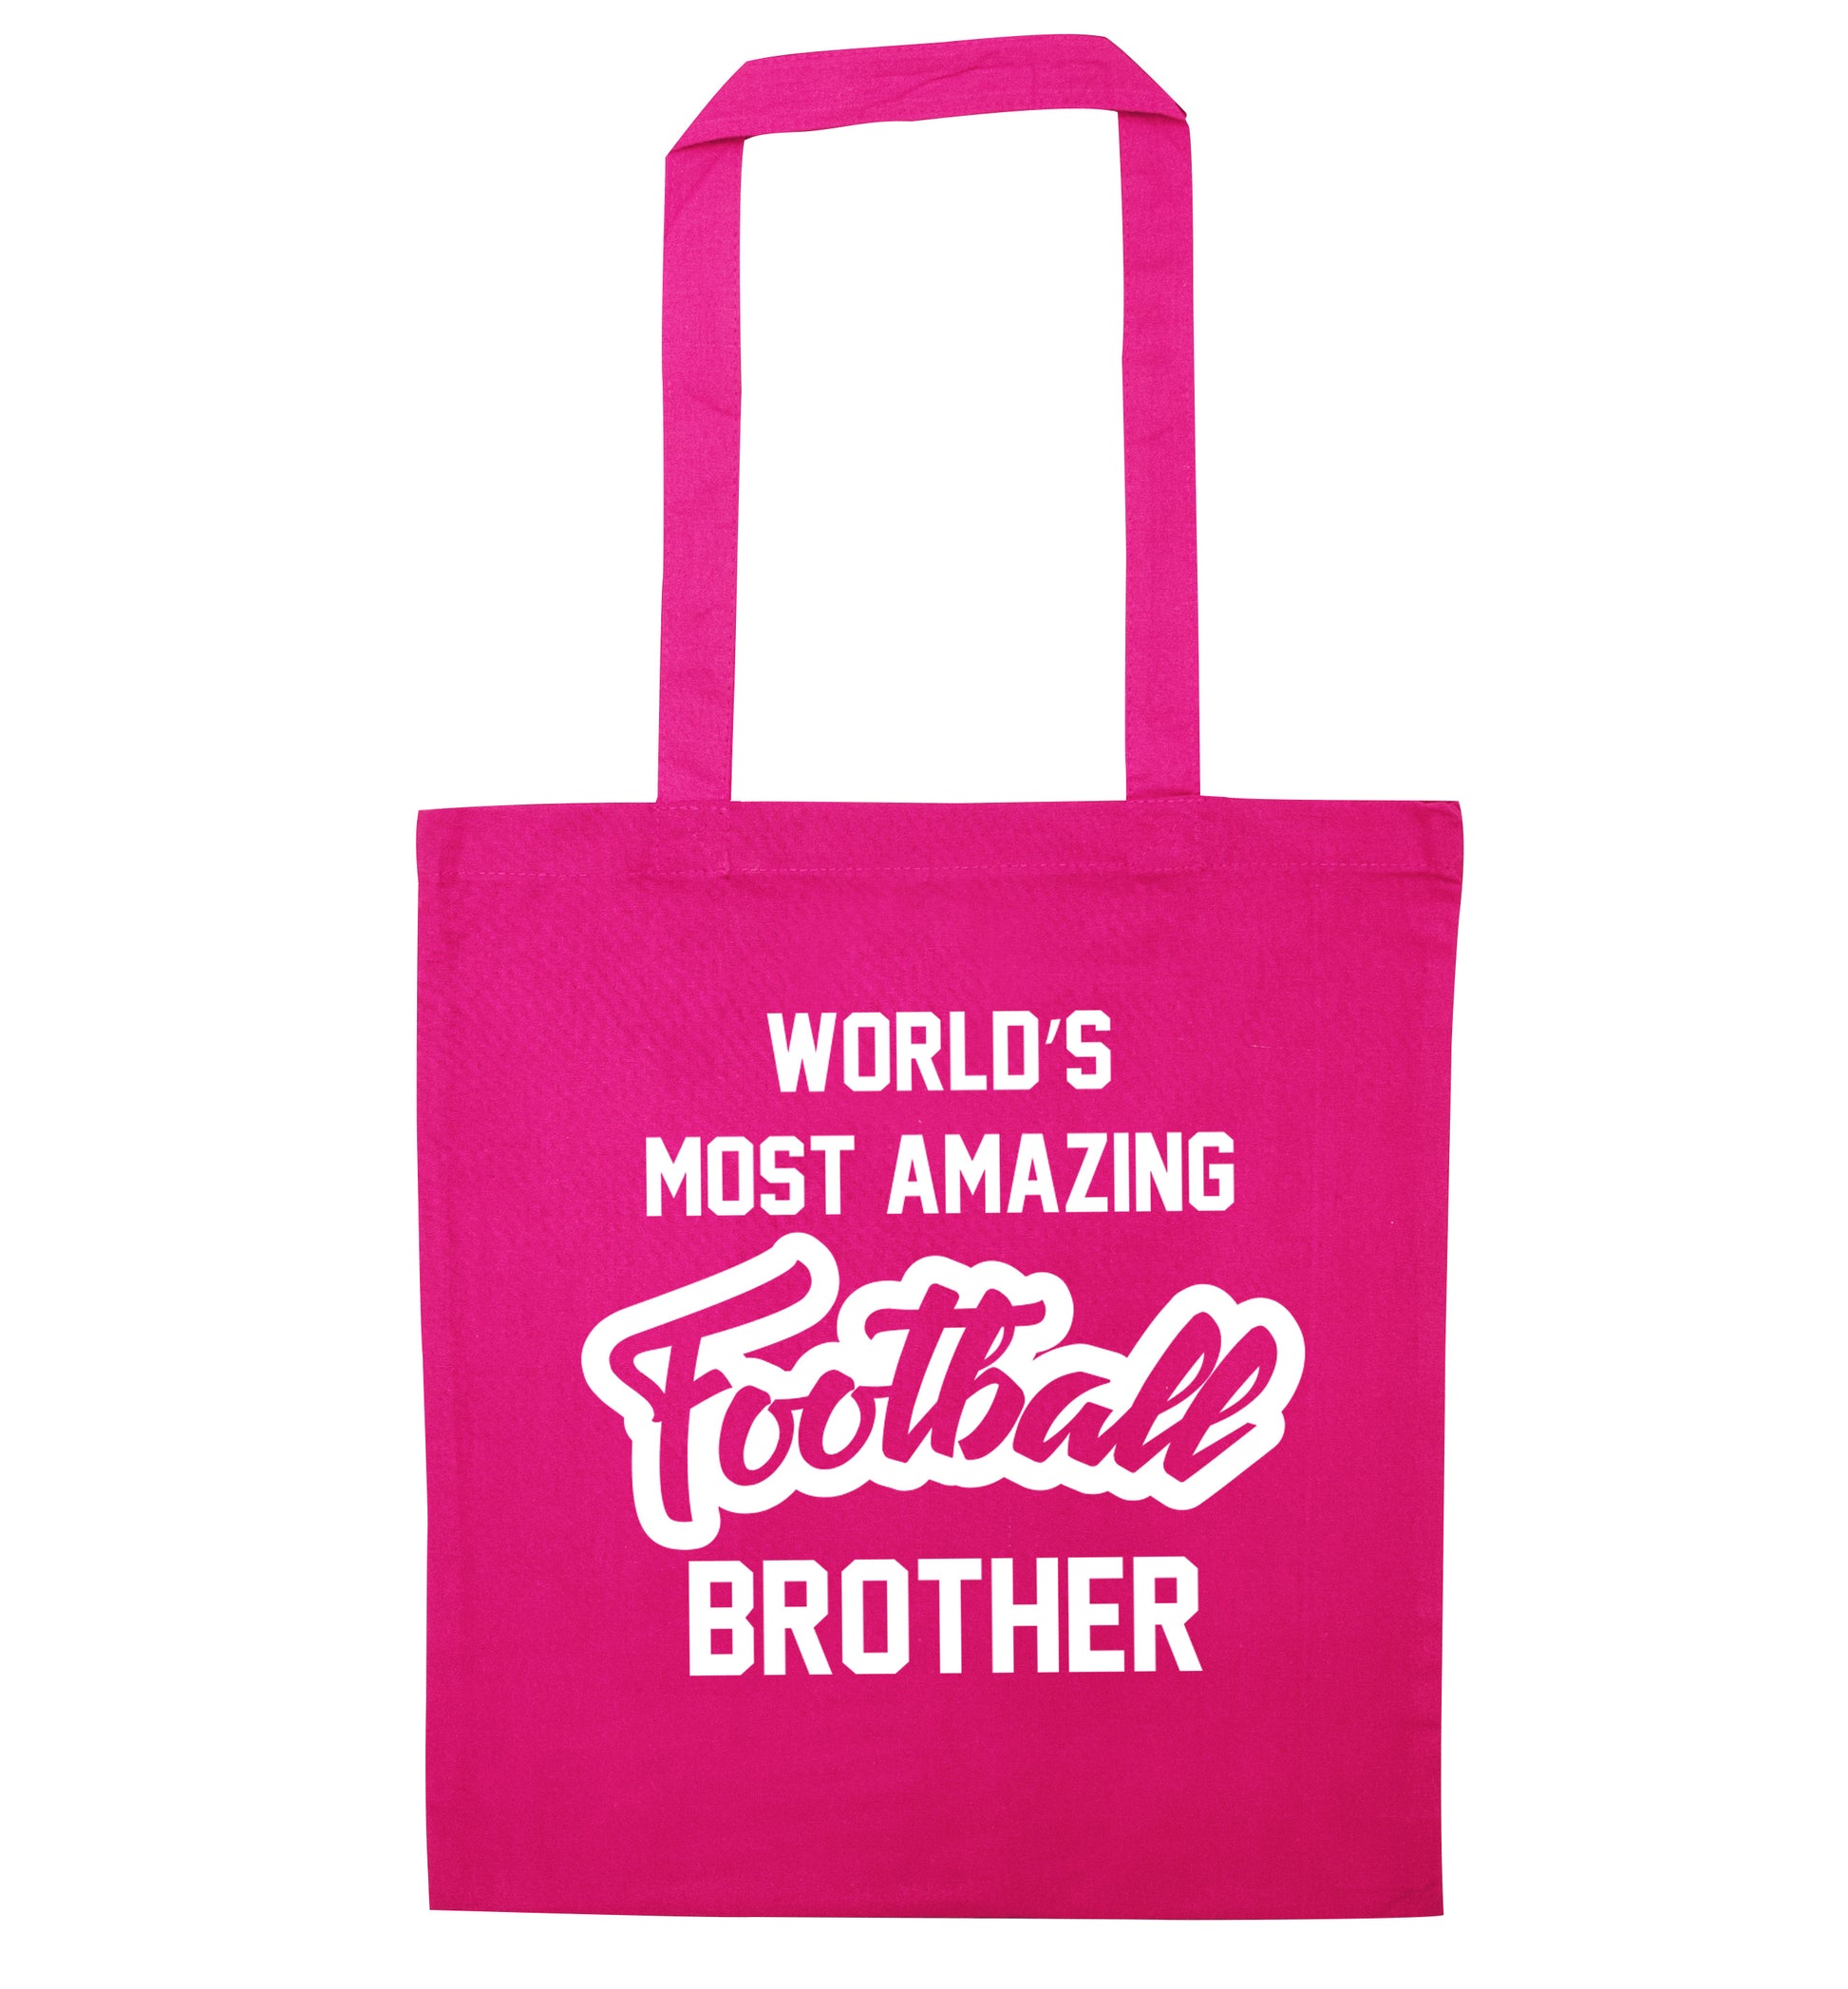 Worlds most amazing football brother pink tote bag